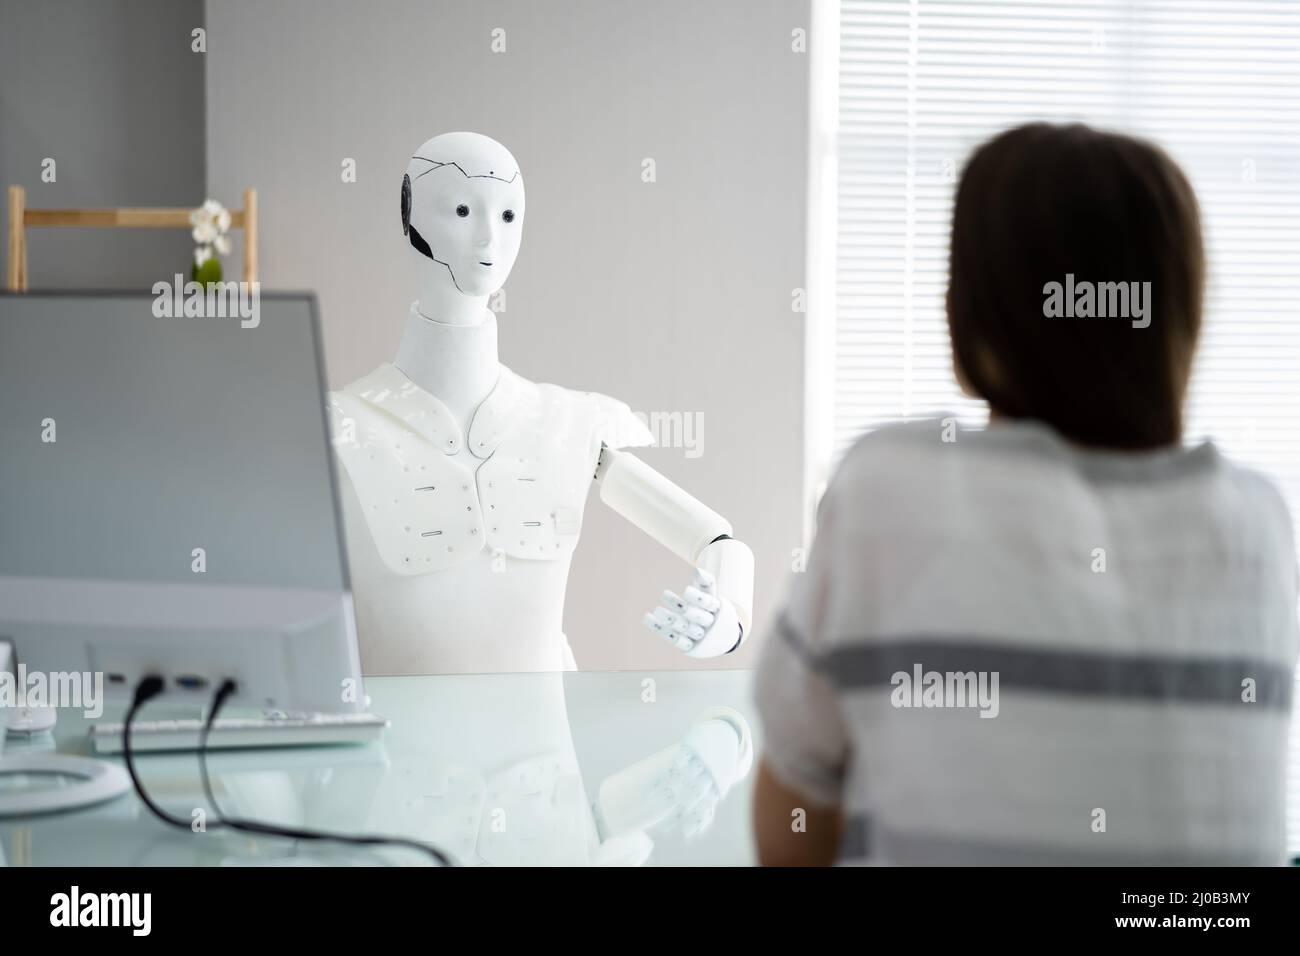 Female Patient Treatment By Robot Doctor In Hospital Stock Photo